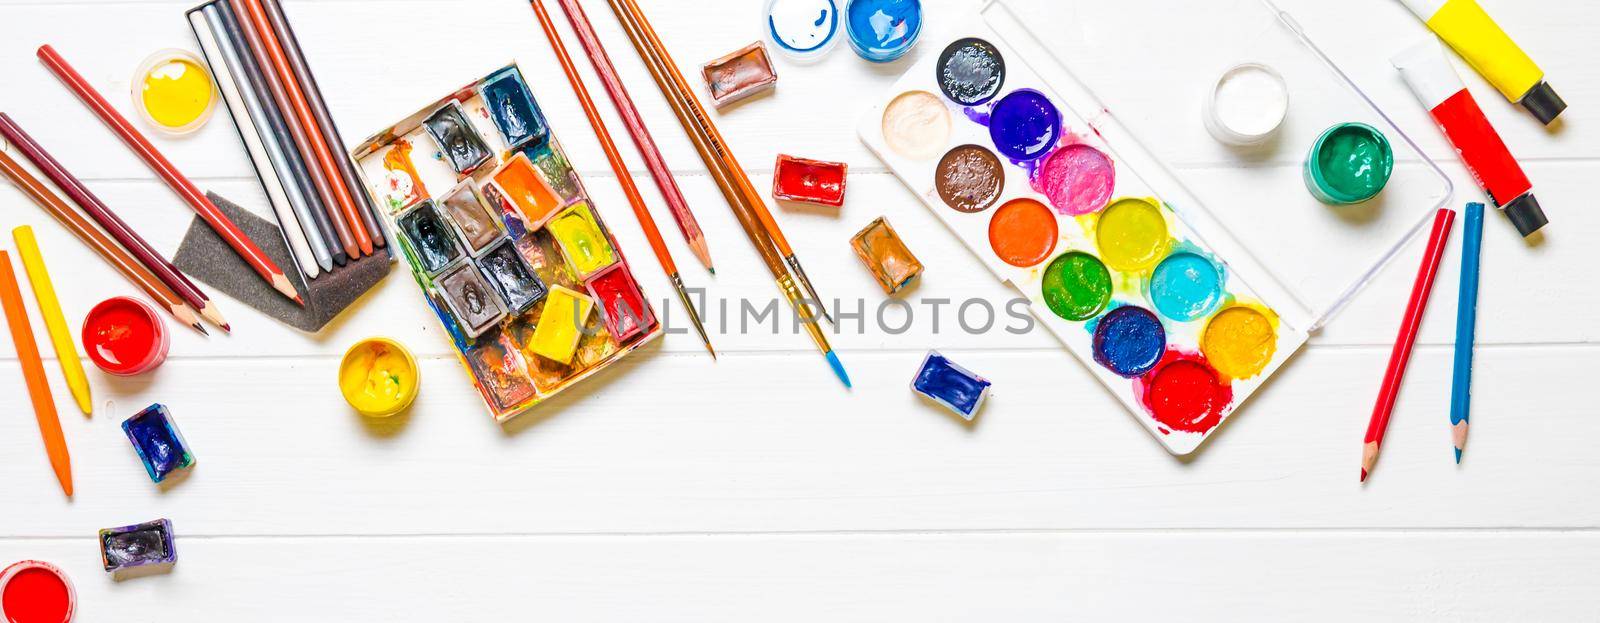 Watercolor paints with brushes and colored pencils on white wooden background, top view. Creative art concept